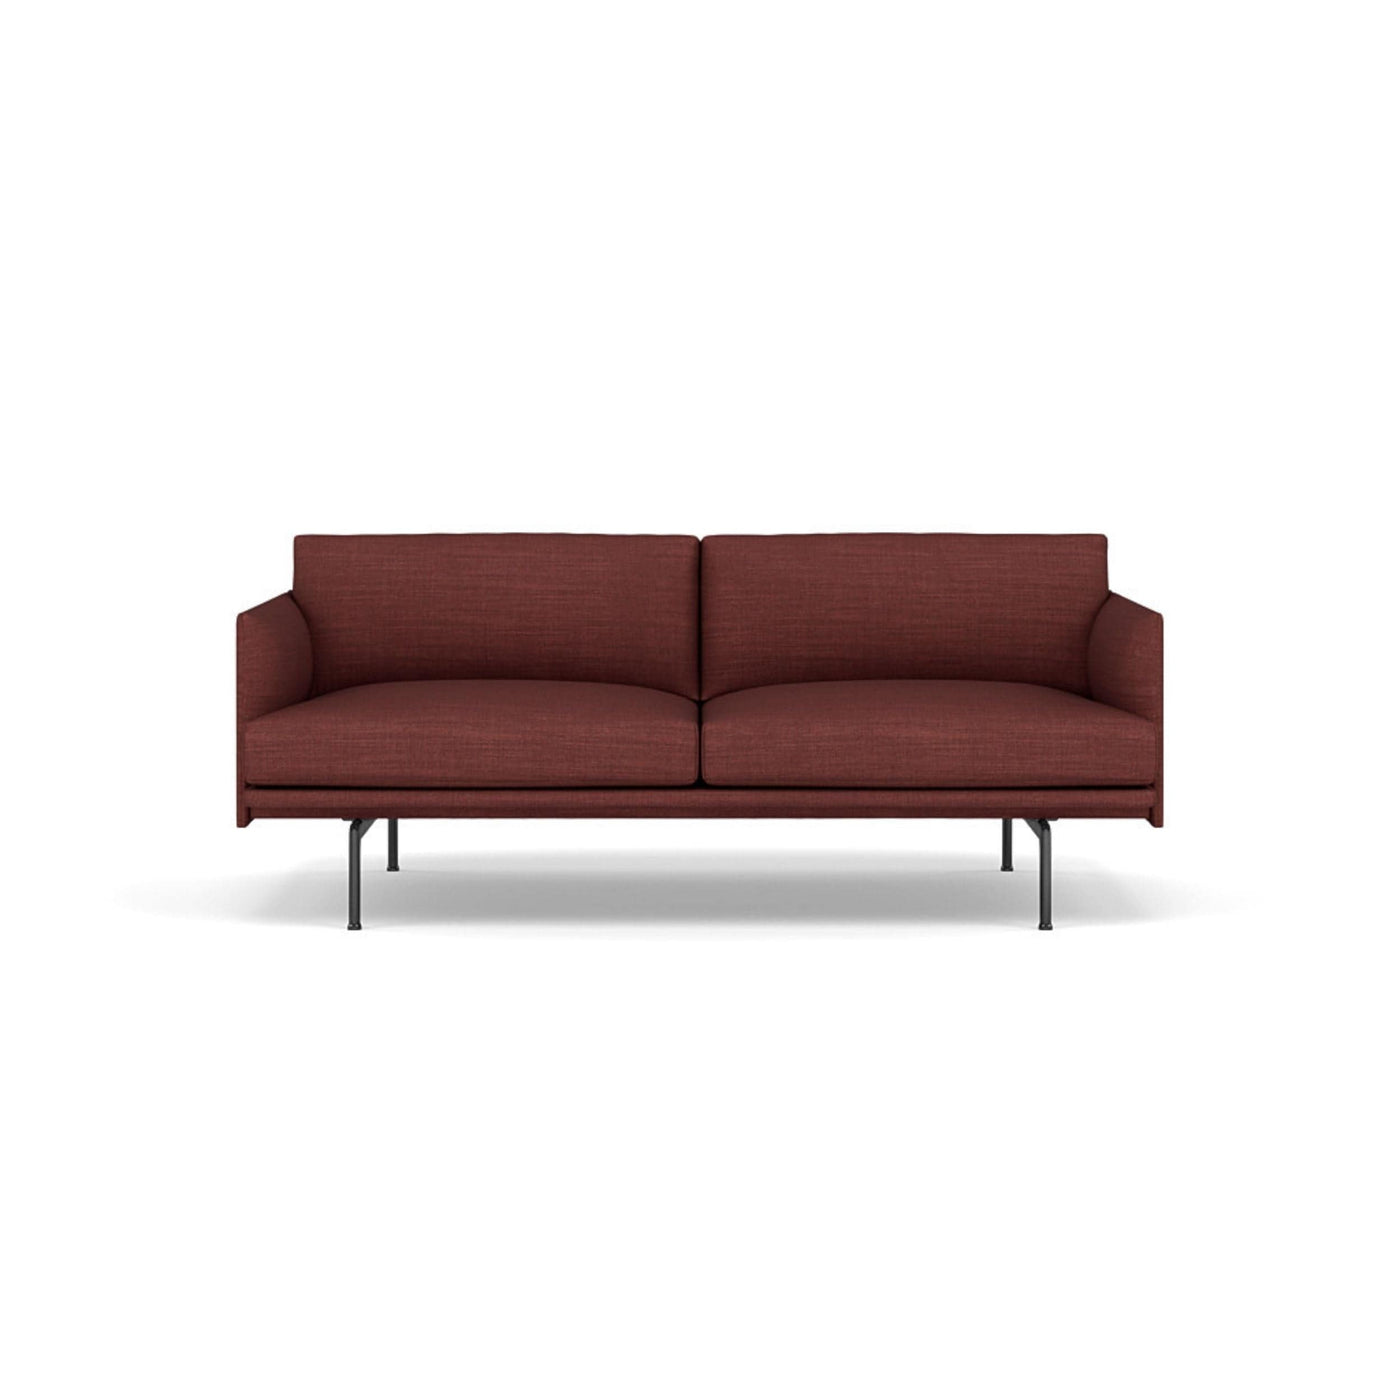 Muuto outline 2 seater sofa in canvas 576 red fabric and black legs. Made to order from someday designs. #colour_canvas-576-red